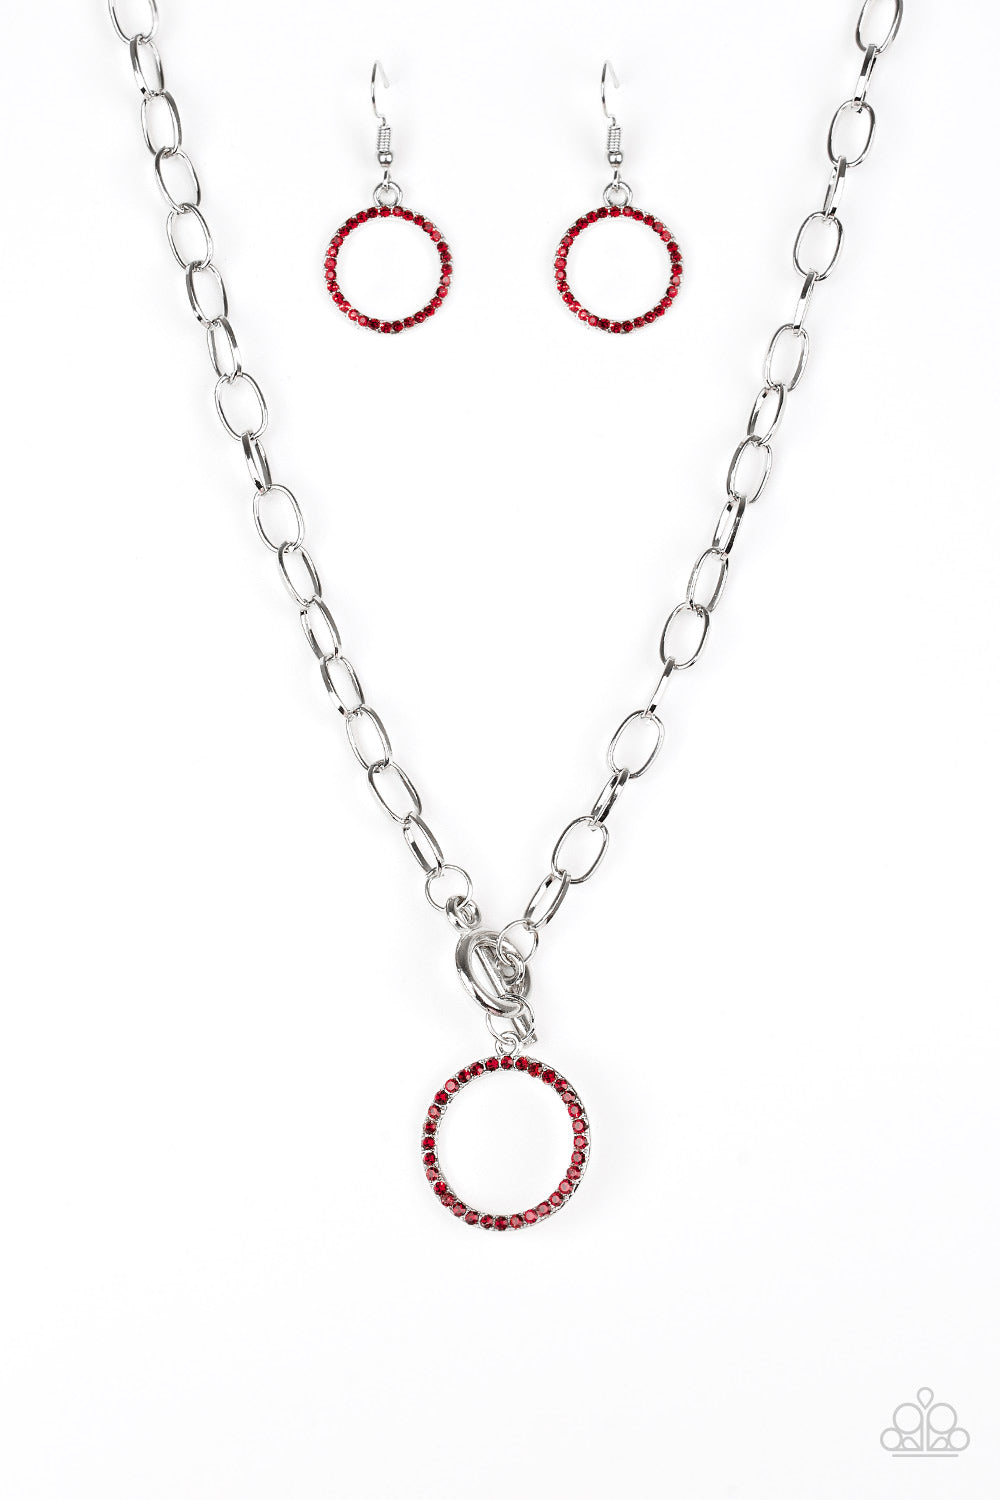 All In Favor - Red and Silver Necklace - Paparazzi Accessories - Encrusted in fiery red rhinestones, a bubbly silver pendant swings below the collar for a colorfully casual look. Features a toggle closure.